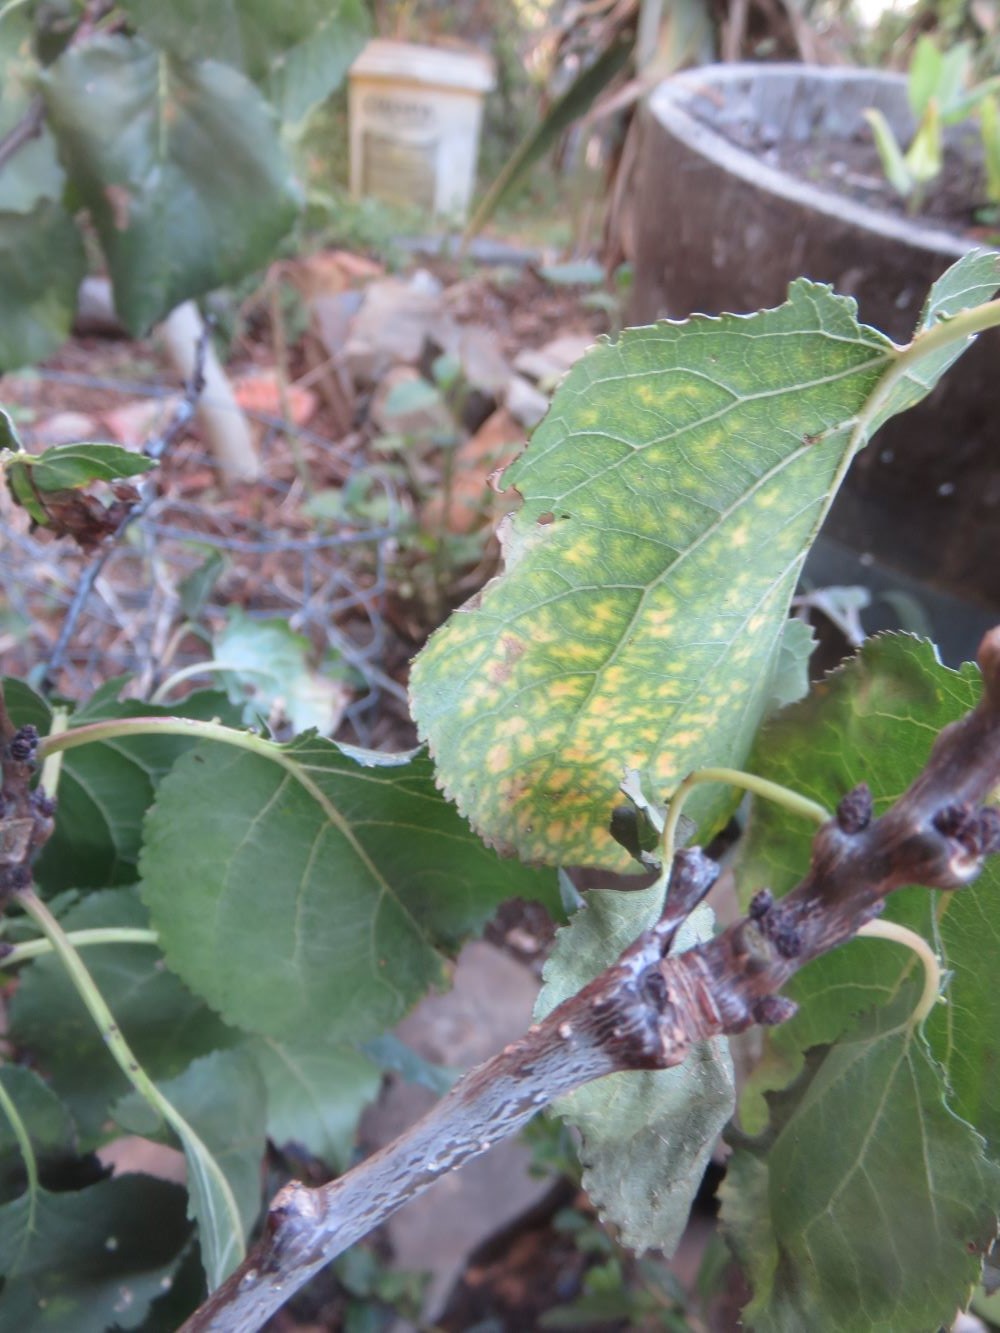 The appearance of fungal disease on my apricot tree and beloved Gemsbok cucumber spurred me into a soil regeneration drive.